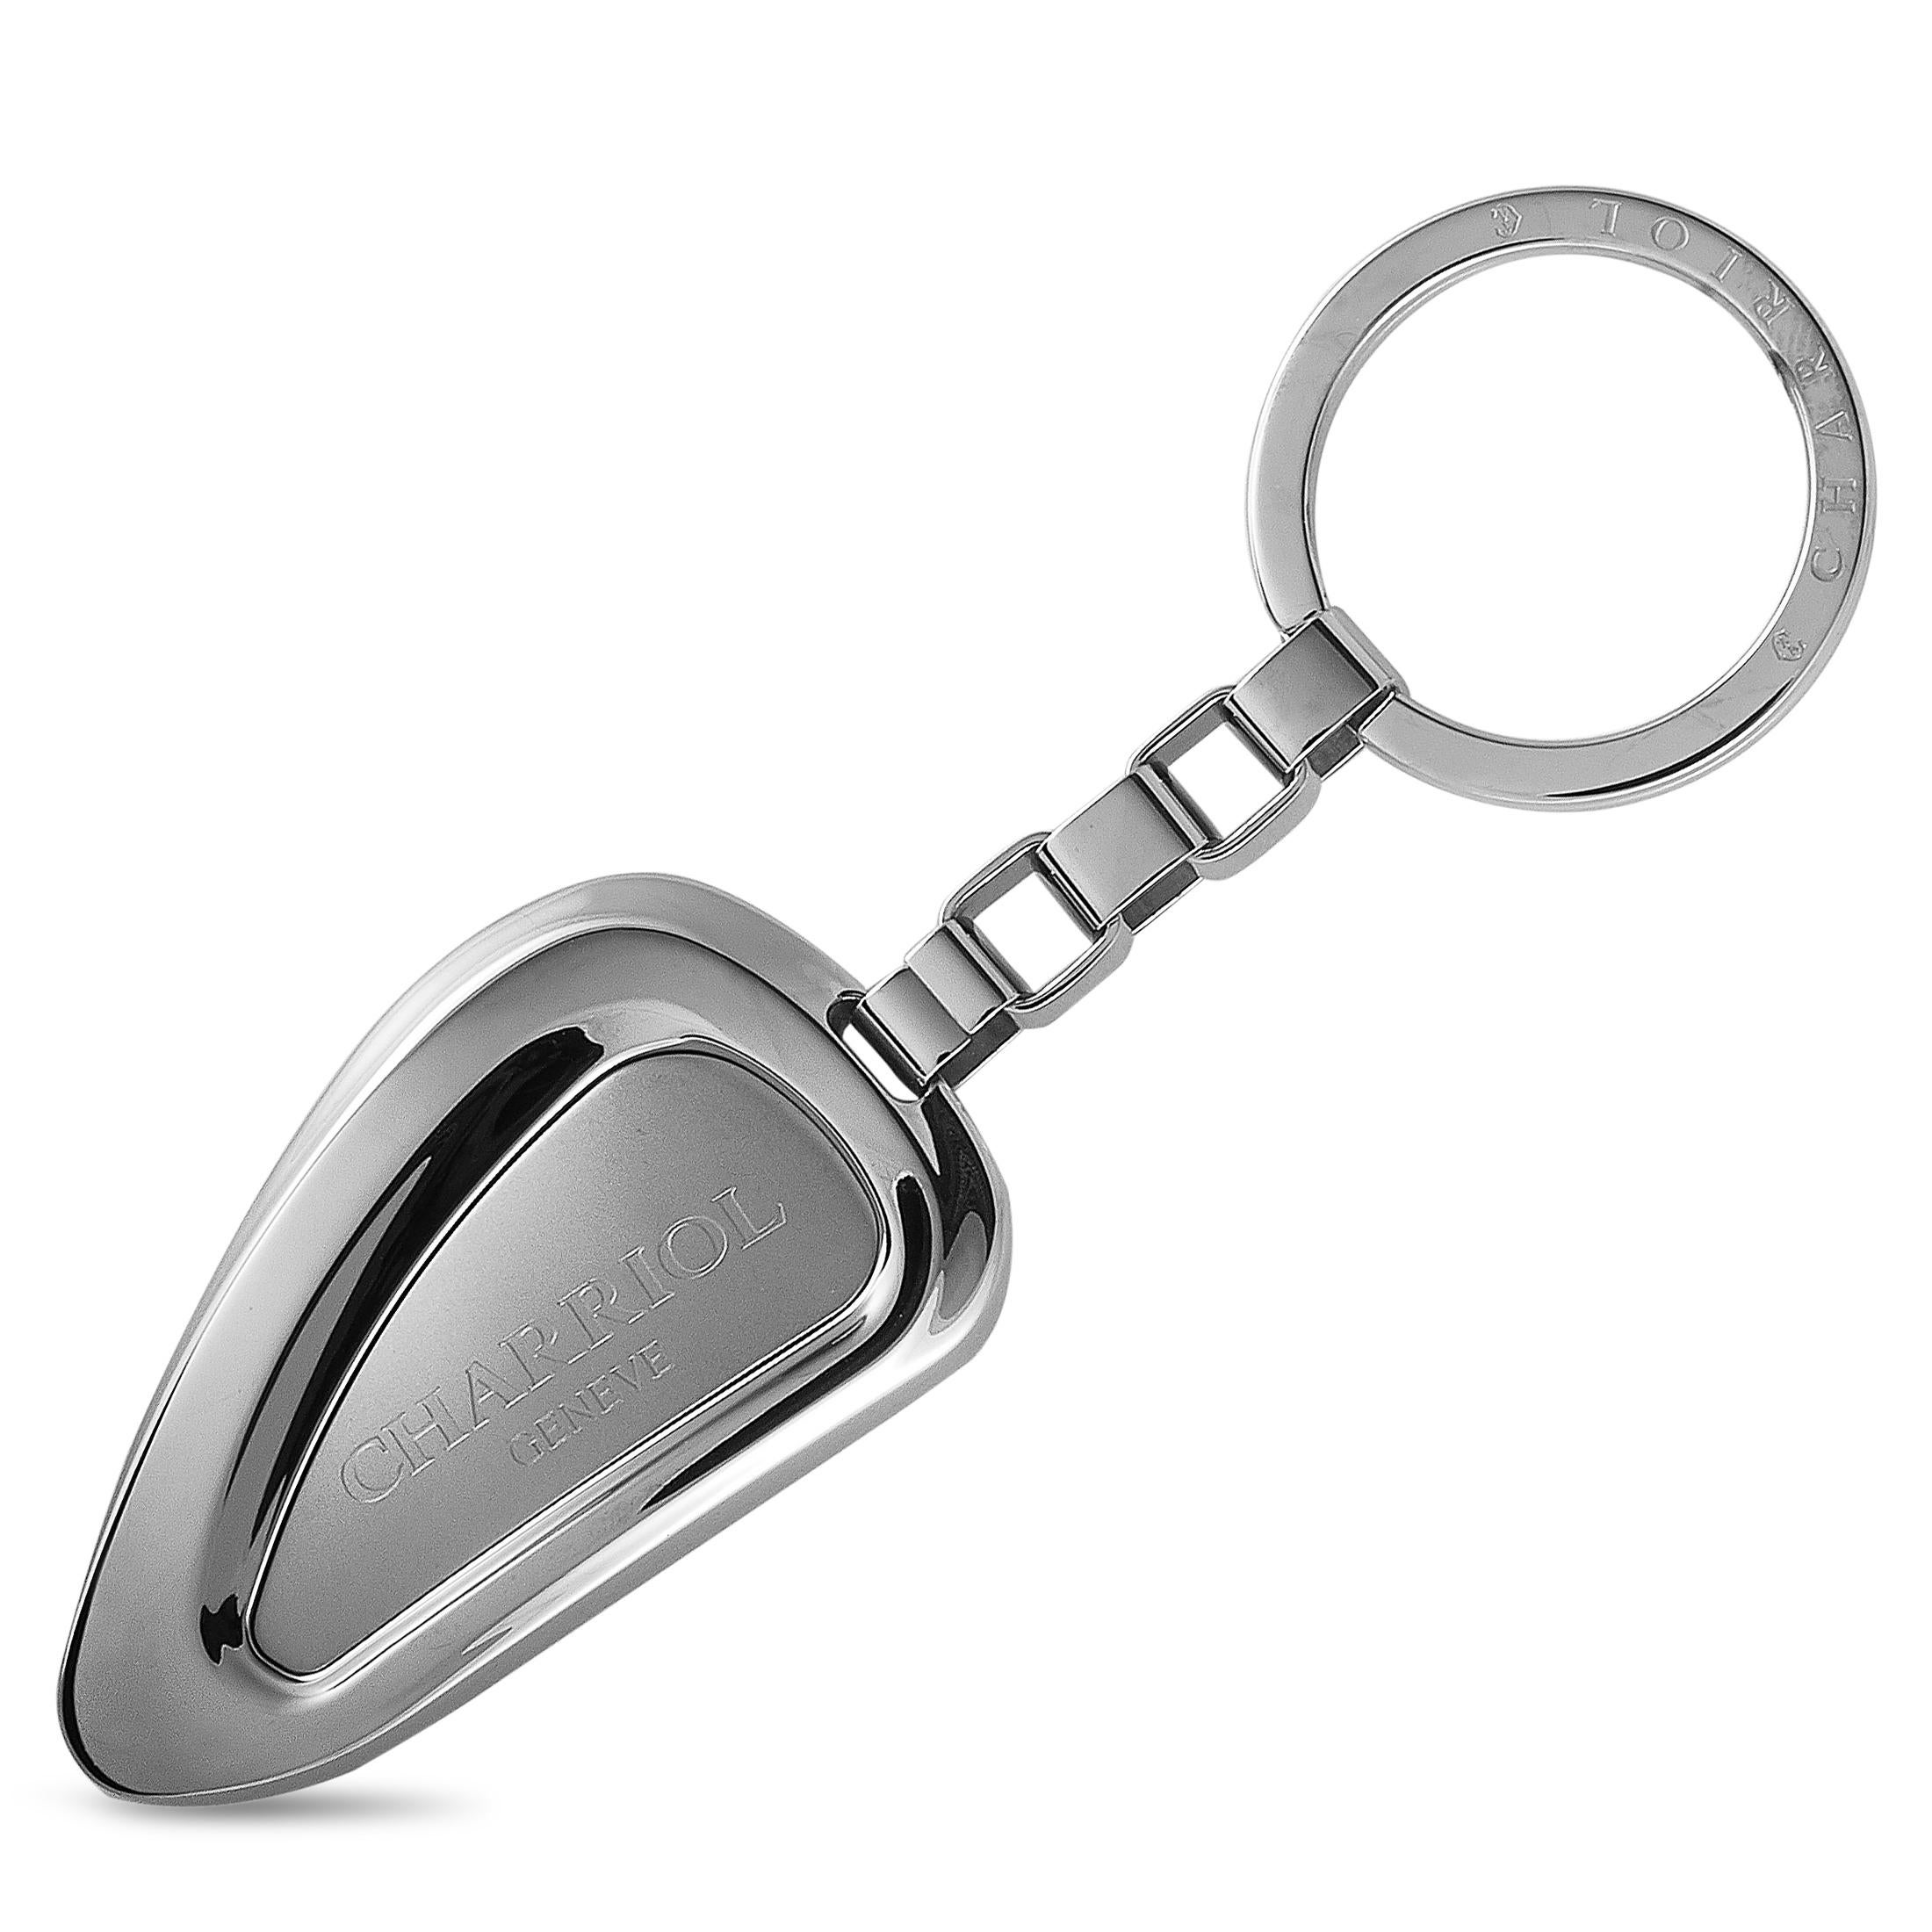 This Charriol keyring is crafted from stainless steel and weighs 61 grams, measuring 4.20” in length.

The keyring is offered in brand-new condition and includes the manufacturer’s box.